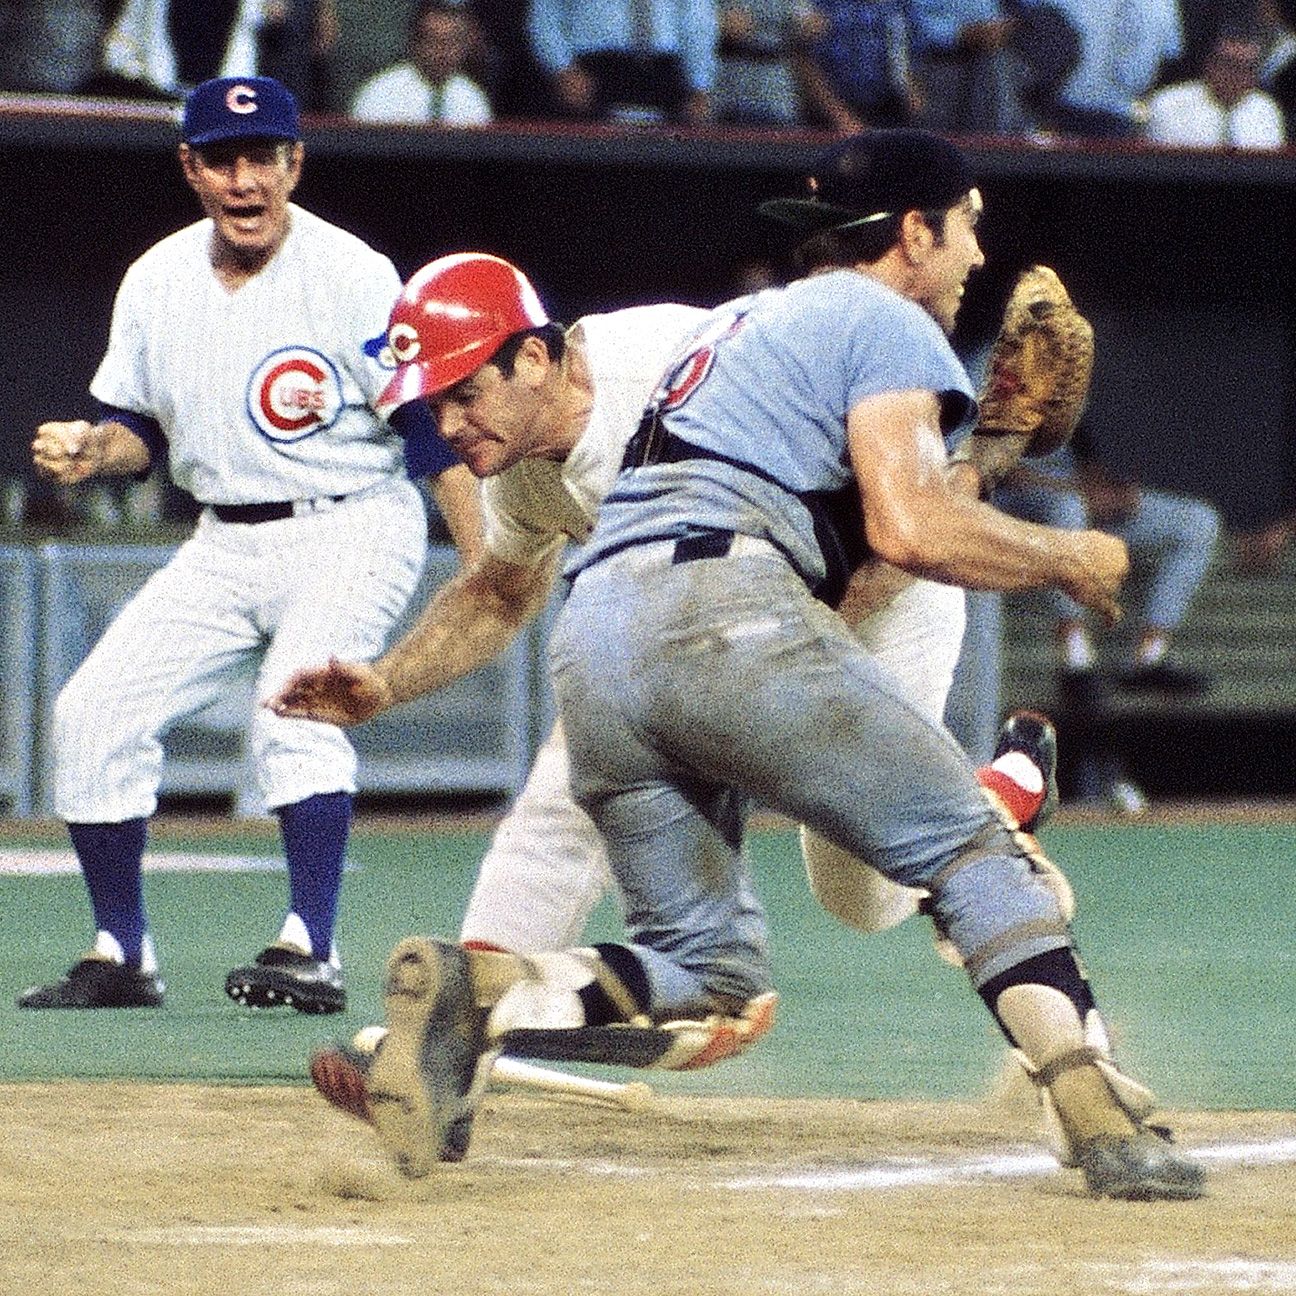 Ray Fosse Pete Rose And The All Star Game Collision That Shook